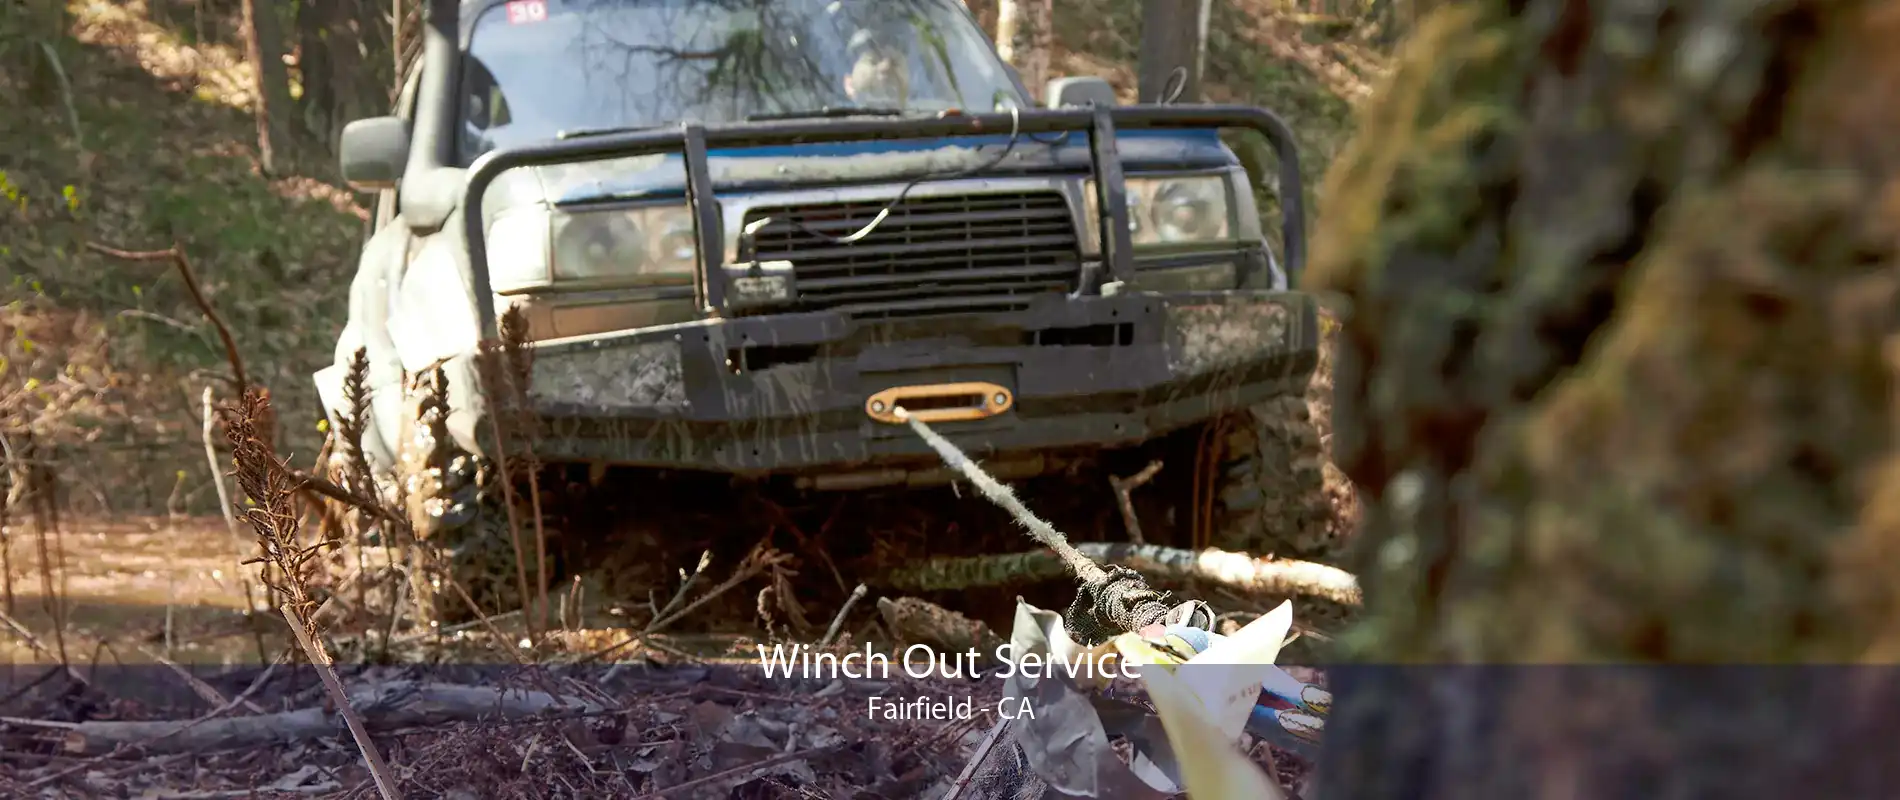 Winch Out Service Fairfield - CA